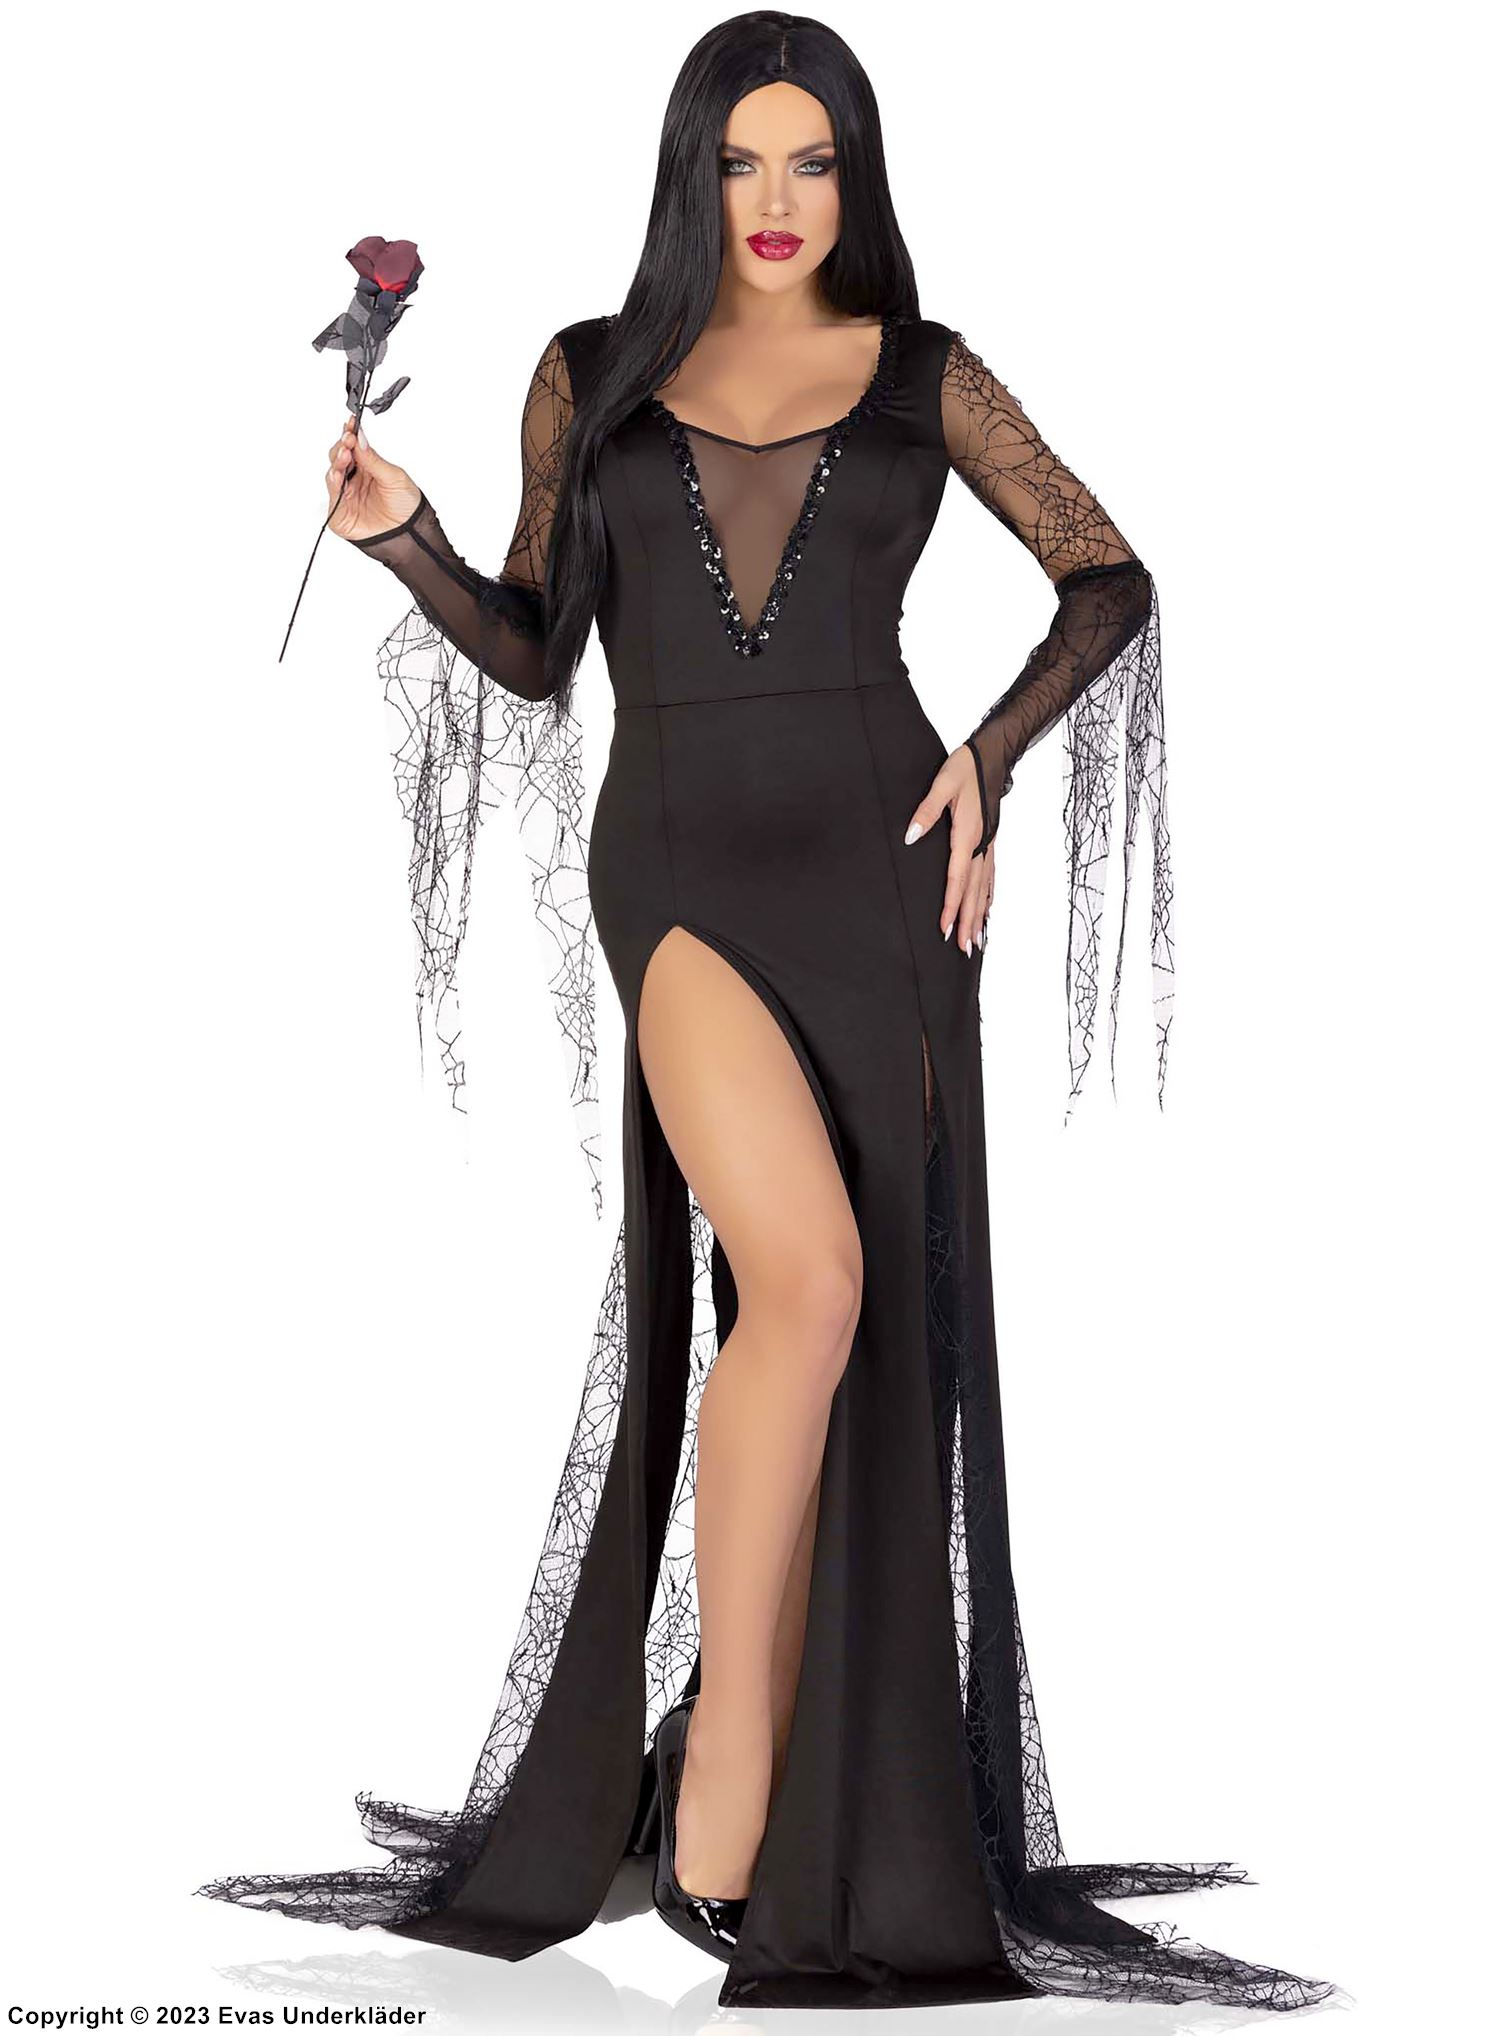 Morticia from The Addams Family, costume dress, high slit, wrinkles, tattered sleeves